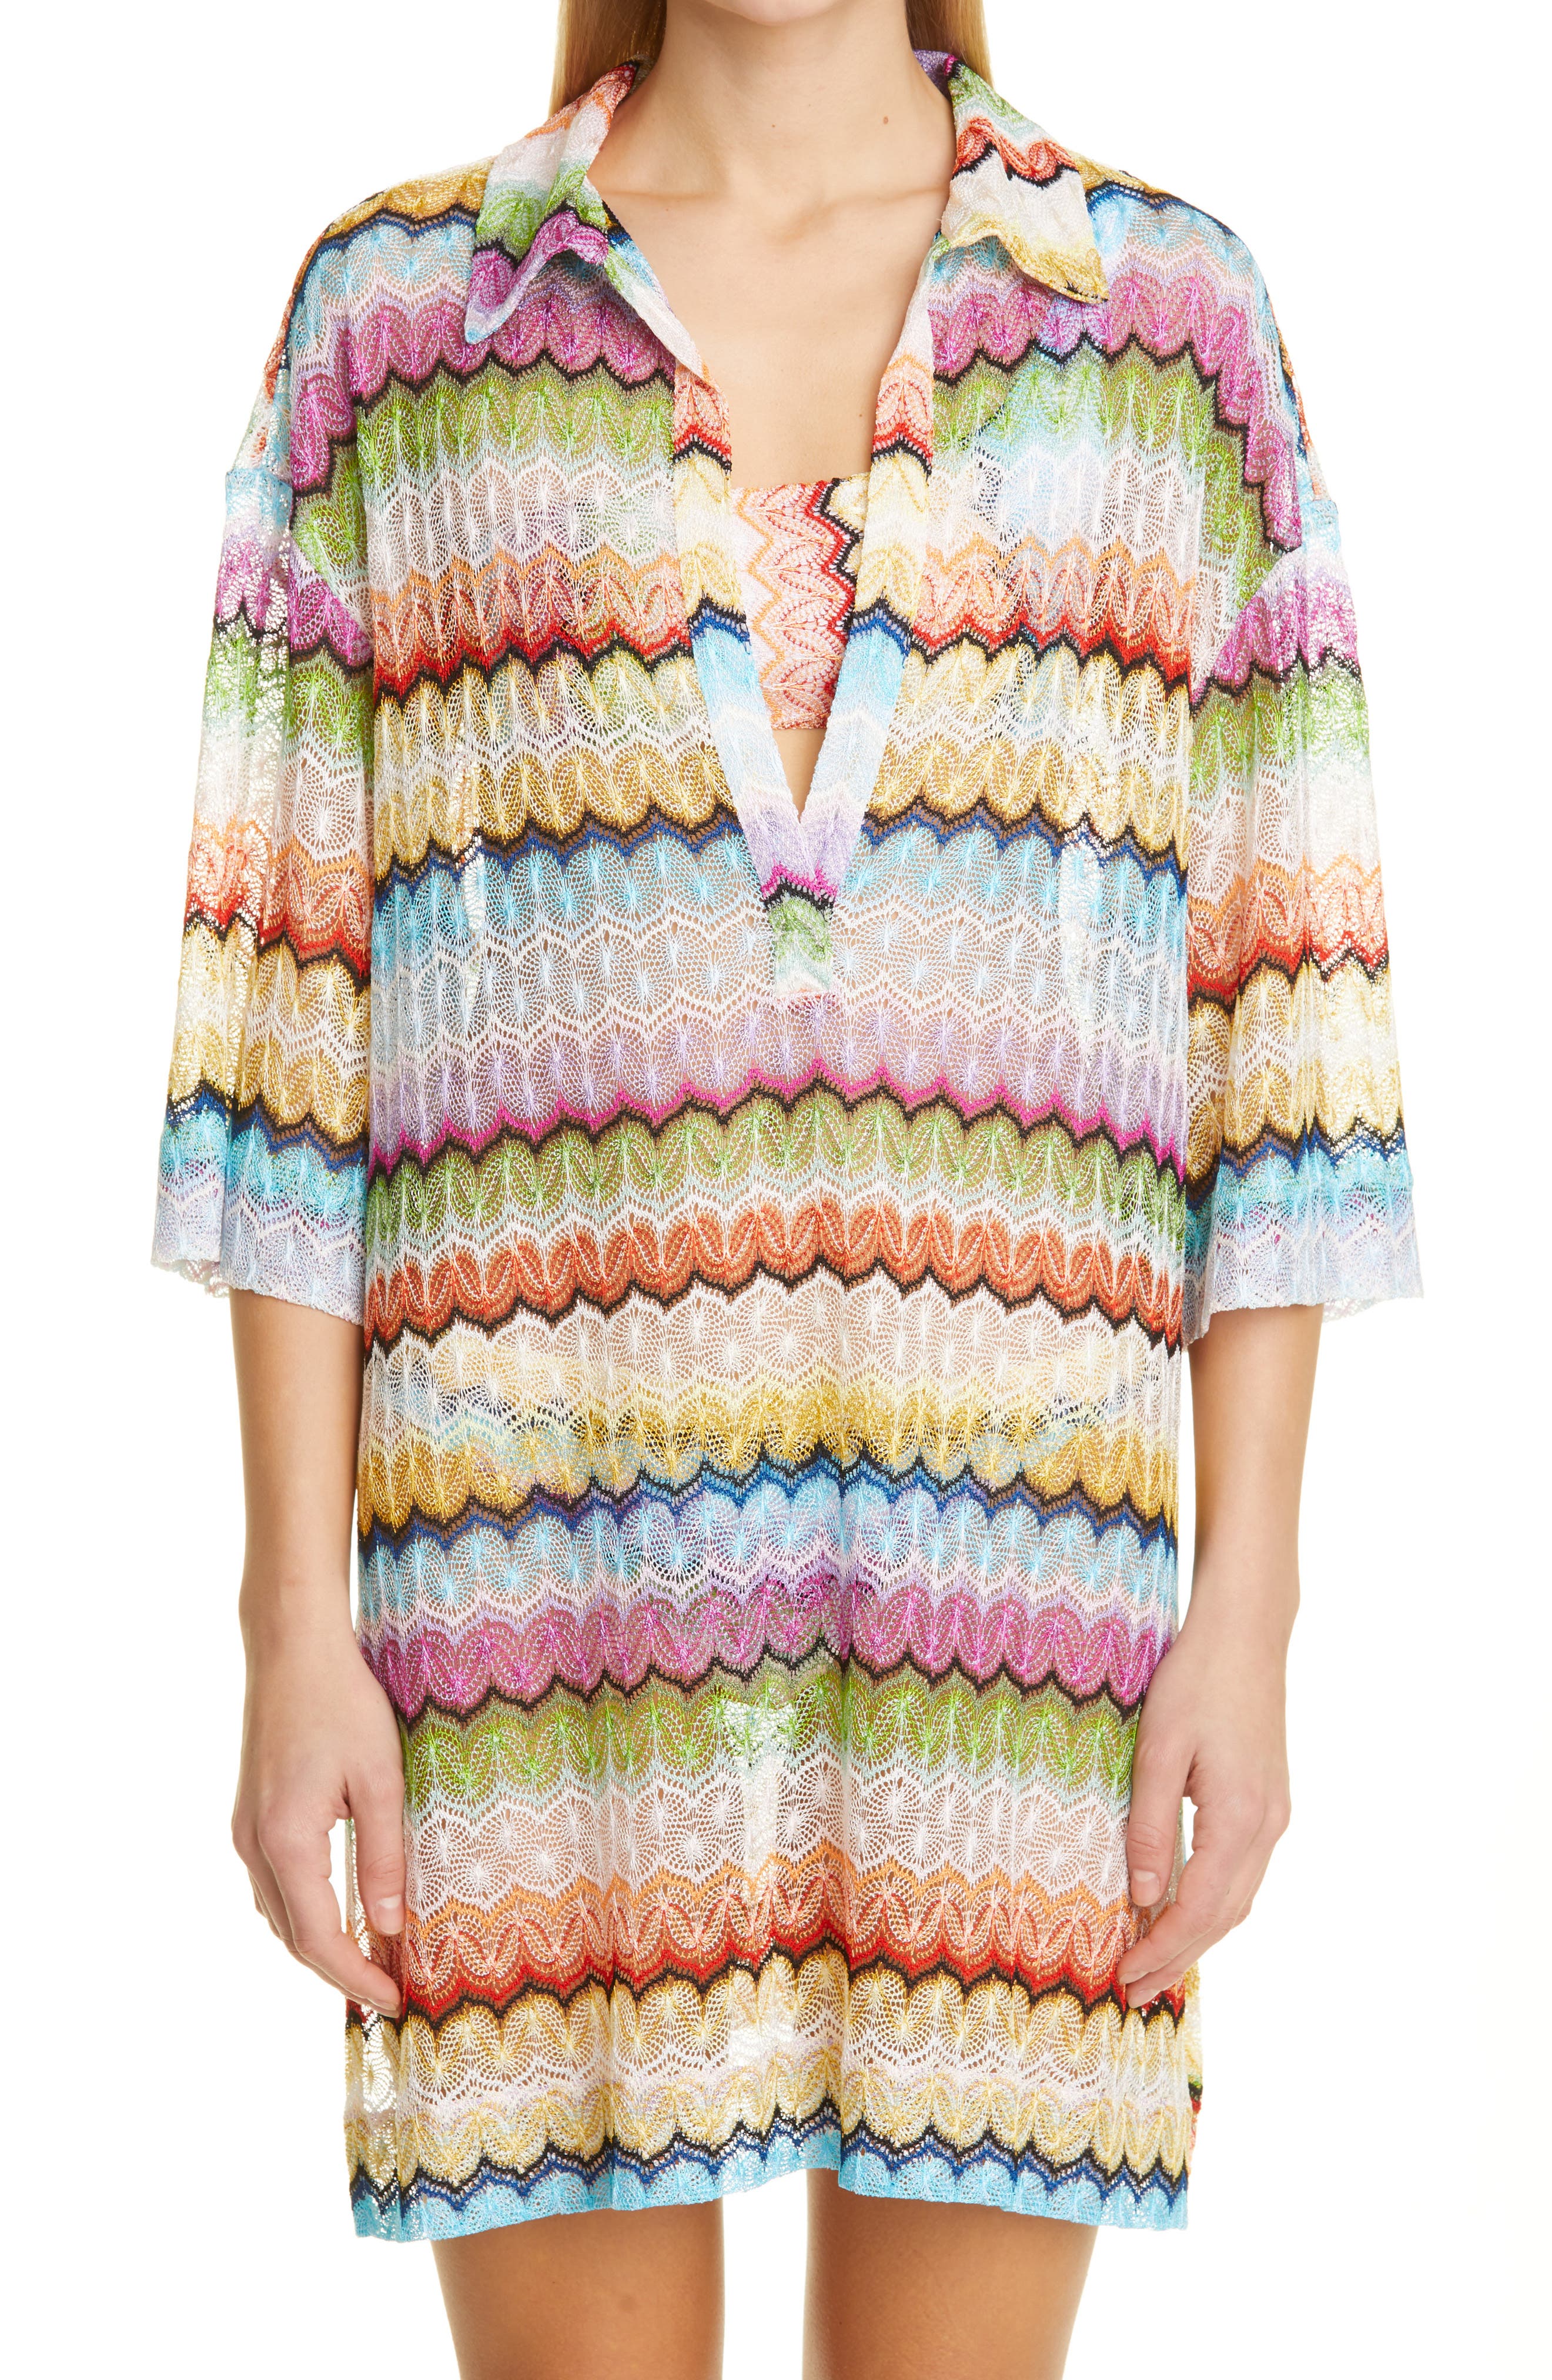 Missoni Zigzag Cover-Up Tunic in Bright Multicolor at Nordstrom, Size 4 Us